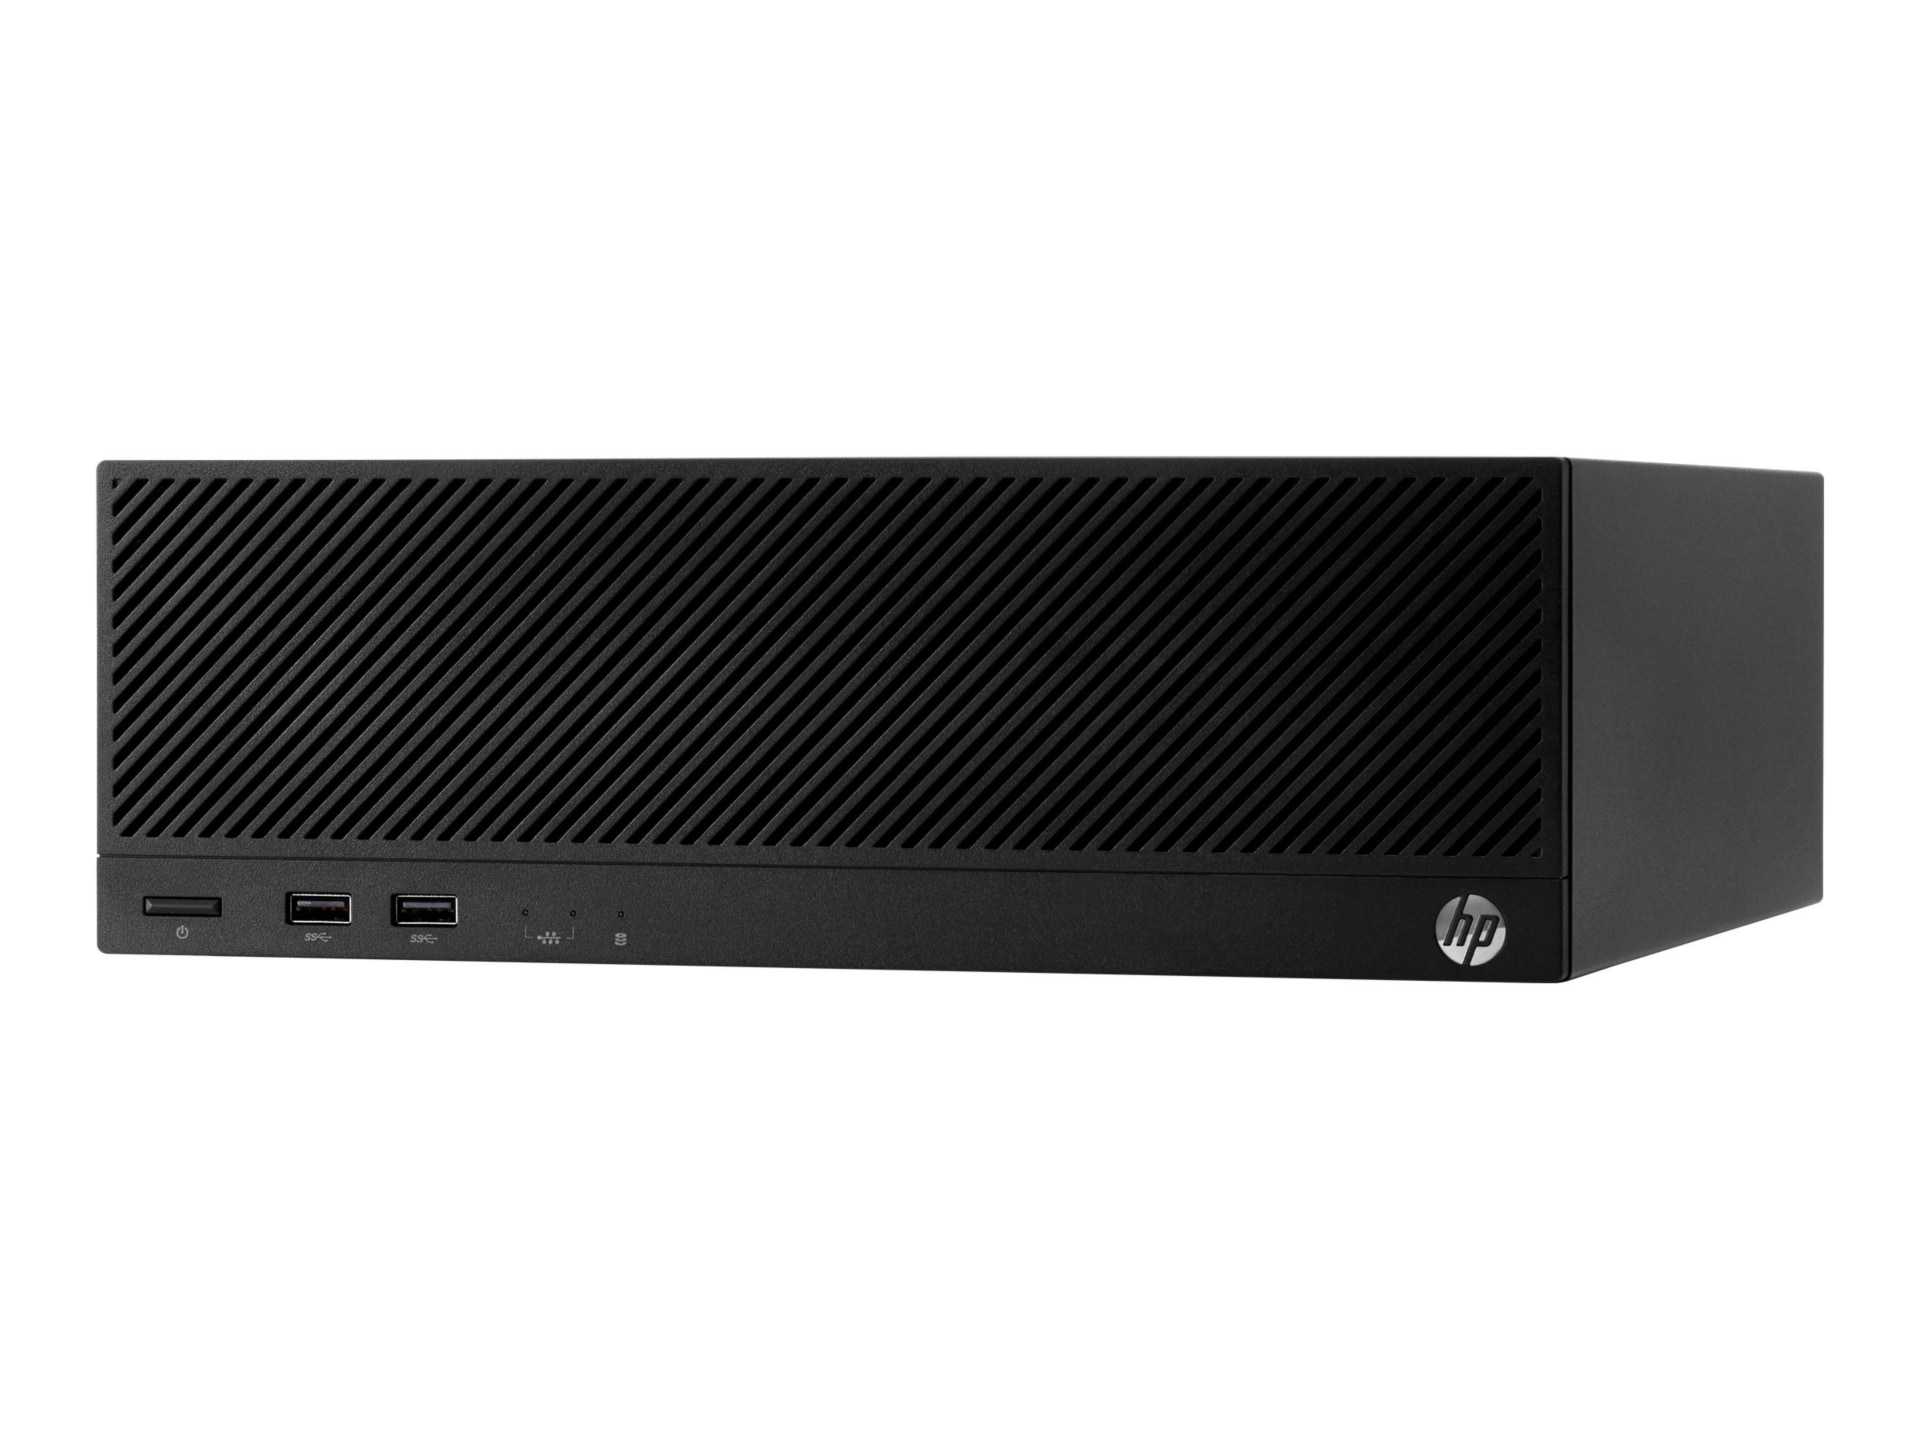 HP Engage Flex Pro-C Retail System - USFF - Core i3 8100 3.6 GHz - 8 GB - S